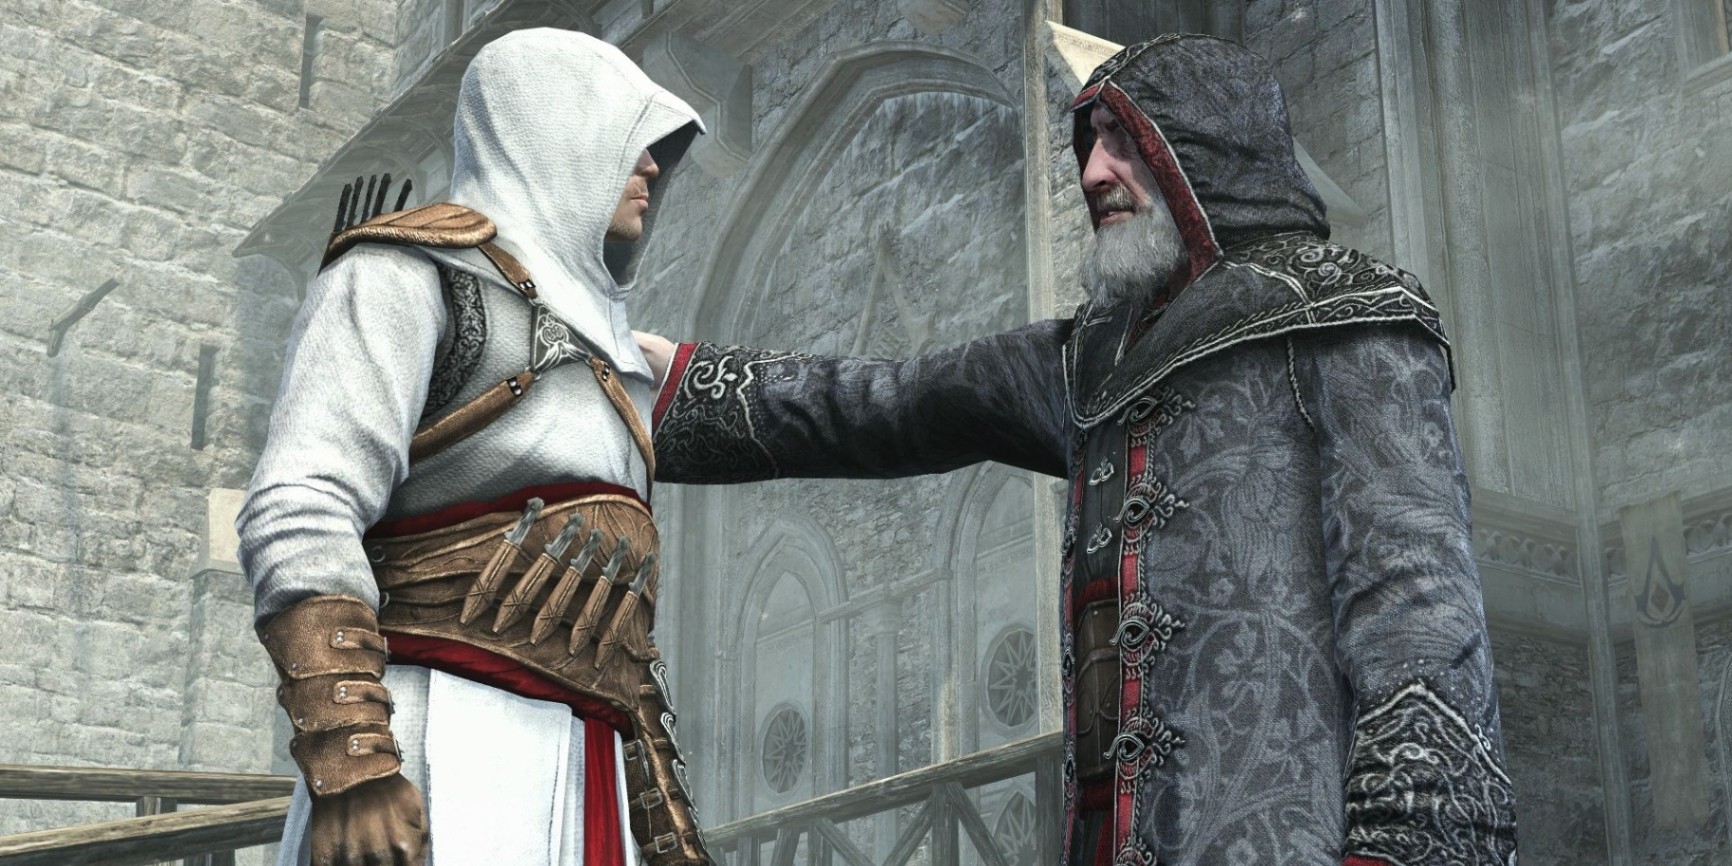 15 Facts Players May Not Know About Assassin's Creed